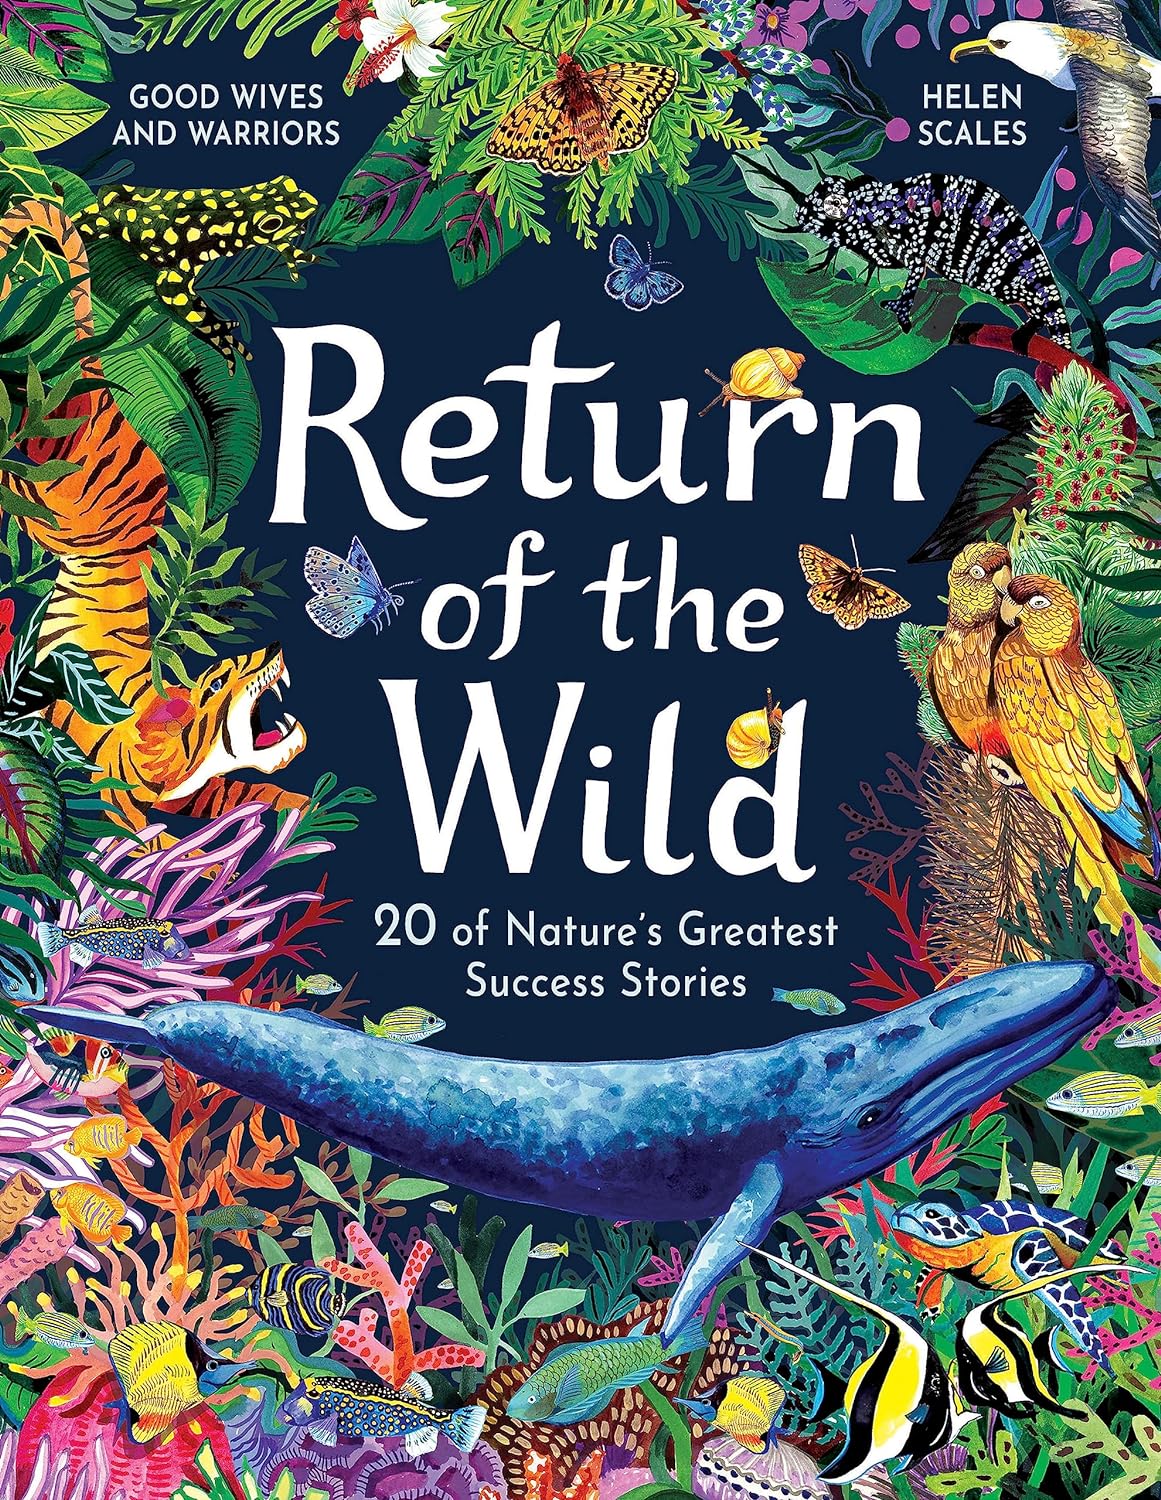 Helen Scales: Return of the Wild, illustrated by Good Wives and Warriors